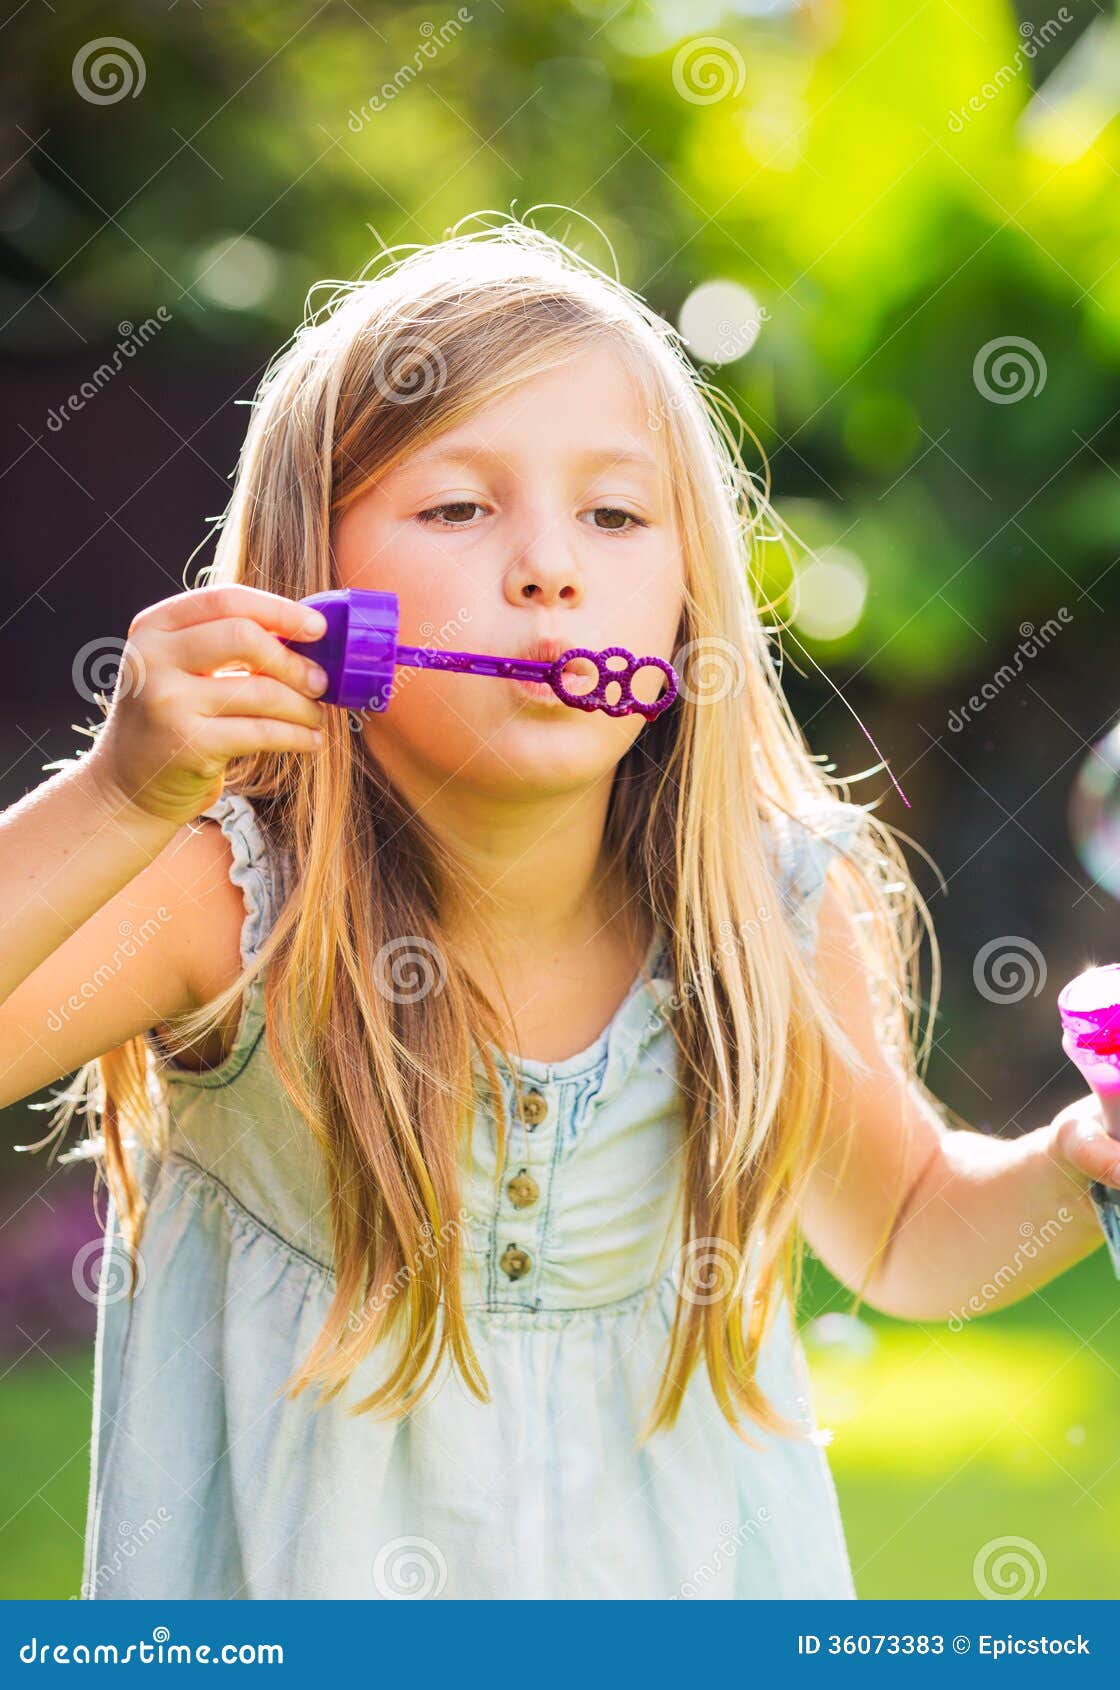 Cute Little Girl Blowing Soap Bubbles Stock Image - Image of child ...